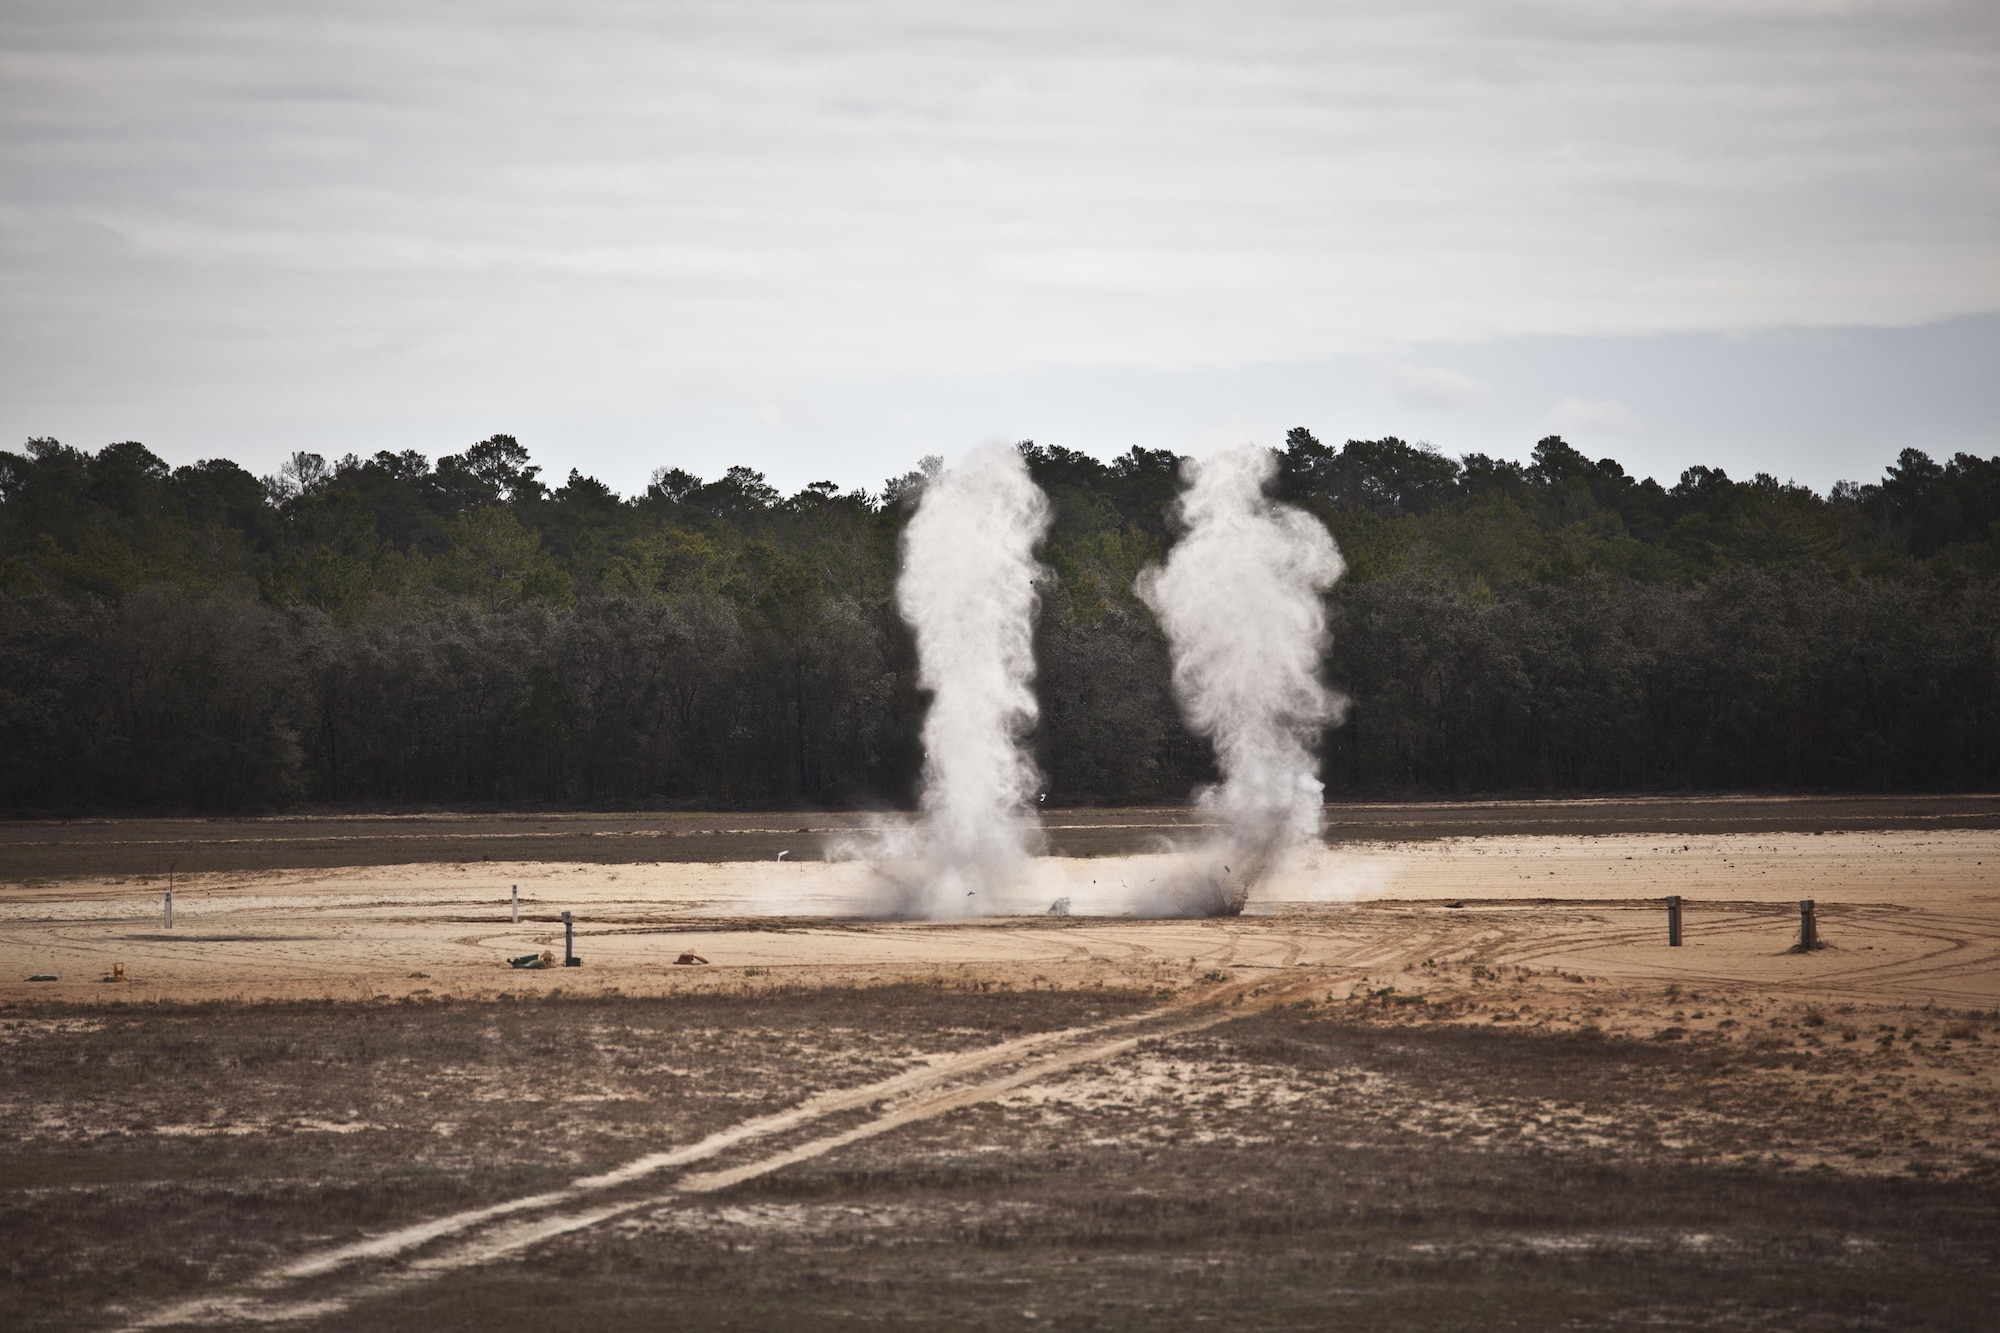 U.S. service members attending Naval School Explosive Ordnance Disposal (NAVSCOLEOD) conduct live fire explosive training at Eglin Air Force Base, Fla., March 8, 2017. The purpose of NAVSCOLEOD is to train technicians in basic, as well as advanced, courses to perform various duties that include locating, identifying, rendering safe, and disposing of bombs and other hazardous materials. (U.S. Marine Corps photo by Cpl. Laura Mercado)